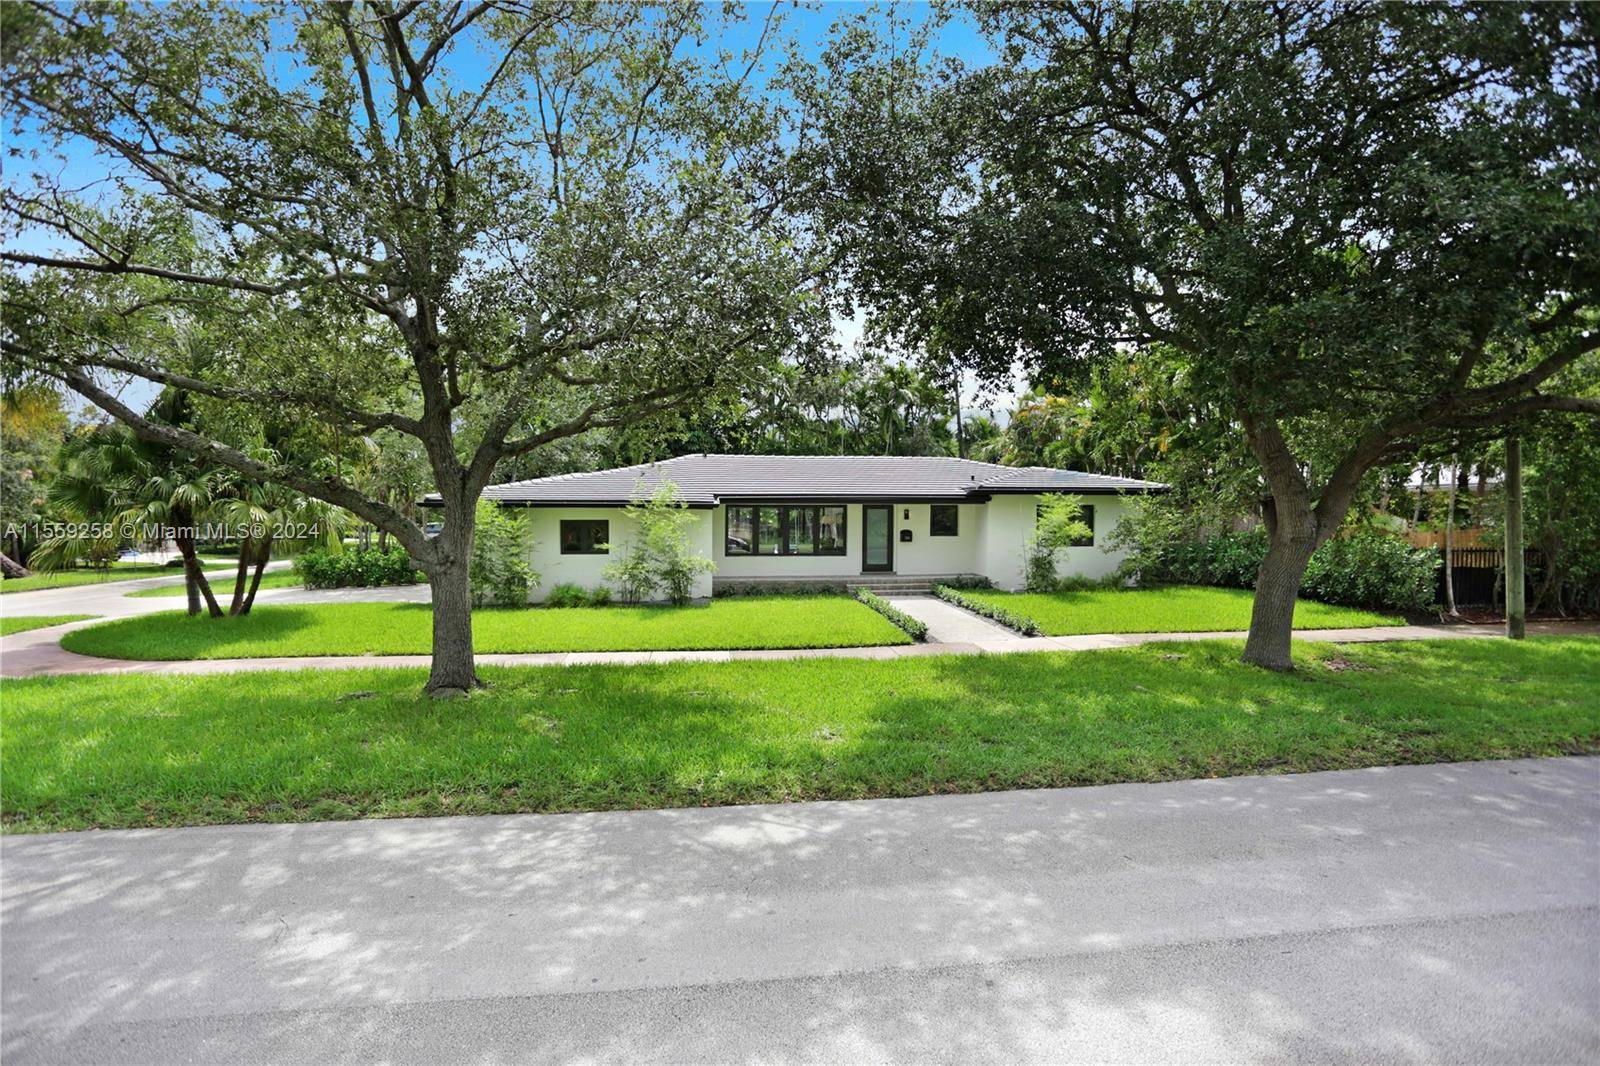 Impeccably designed 3 Bedroom, 3 Bathroom home located on a quiet, tree shaded street in the heart of Coral Gables.